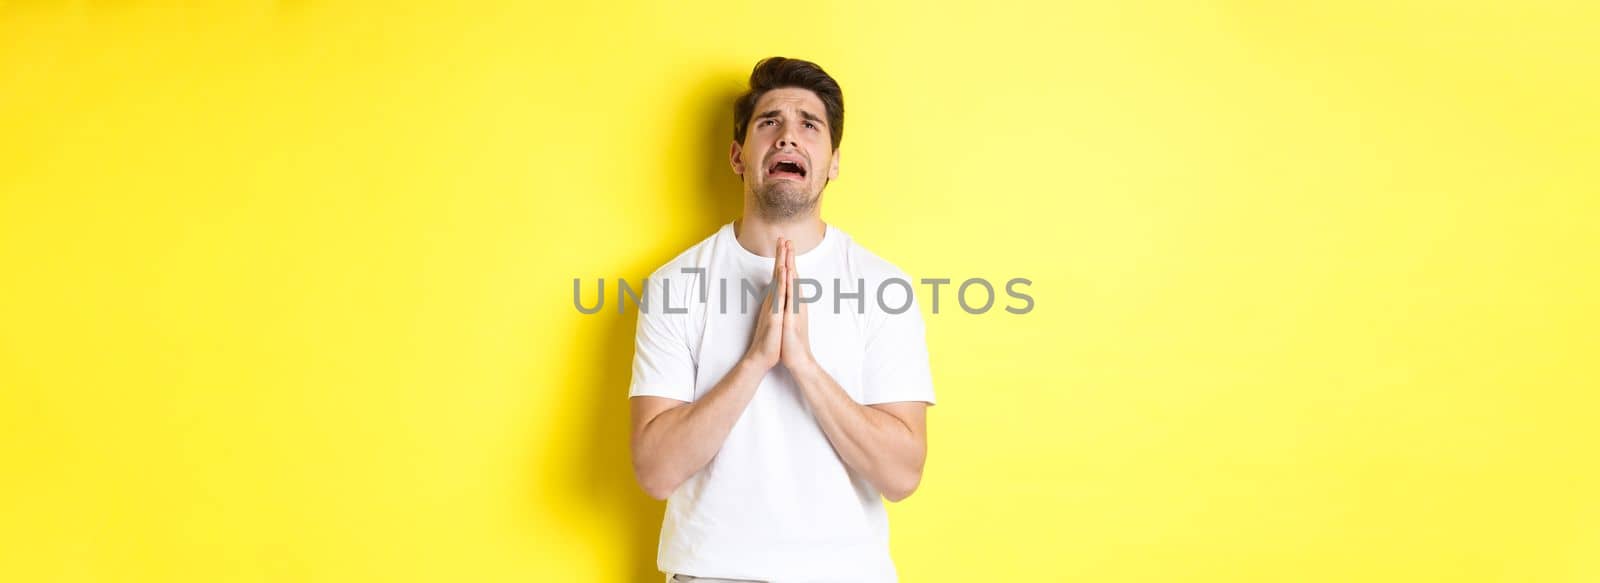 Desperate man pleading God, holding hands in pray and looking up distressed, standing over yellow background. Copy space